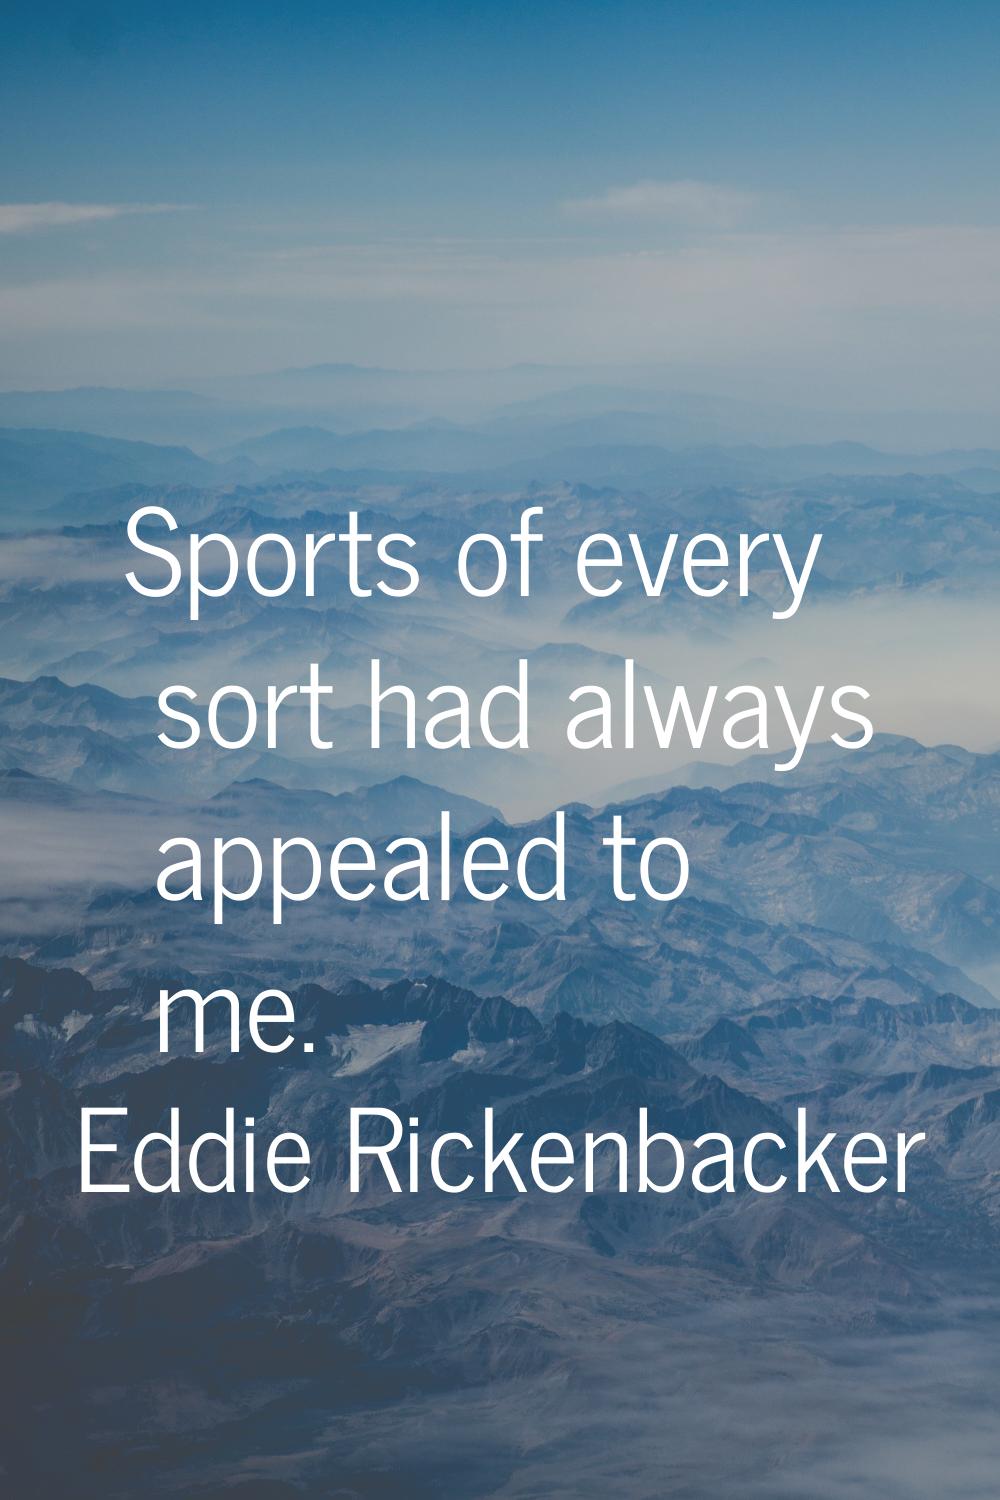 Sports of every sort had always appealed to me.